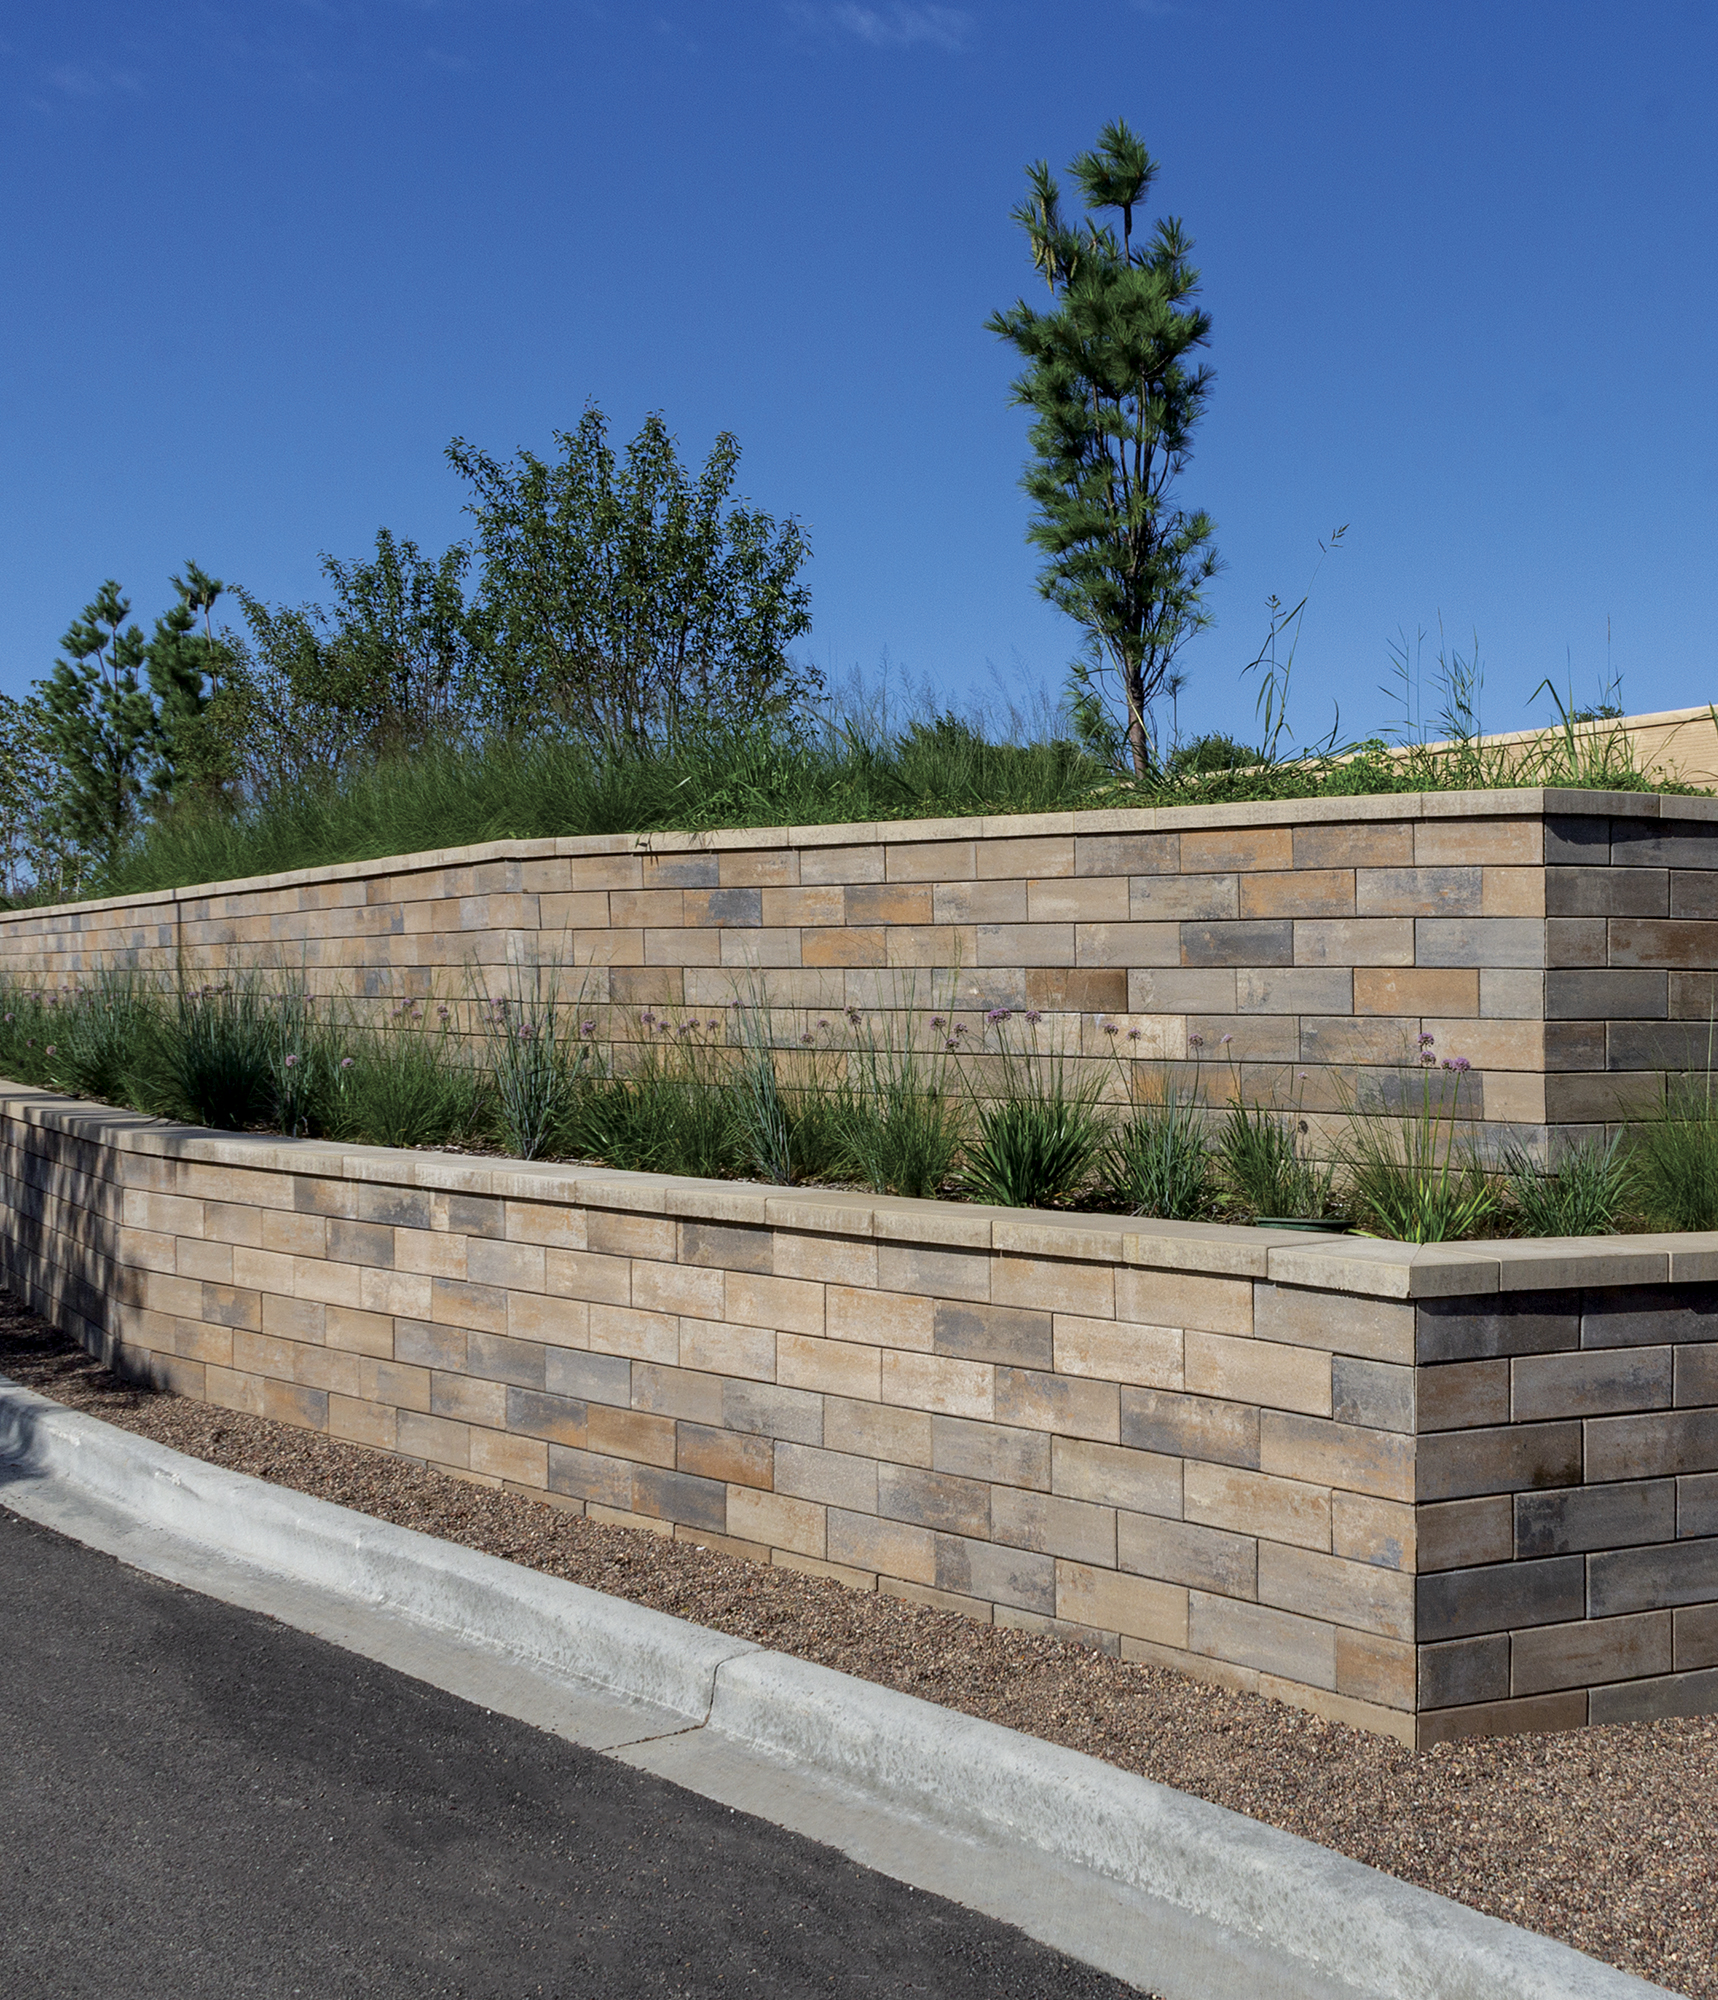 Beside a road is the side and front of a U-Cara wall with two levels and landscaping and trees in it.